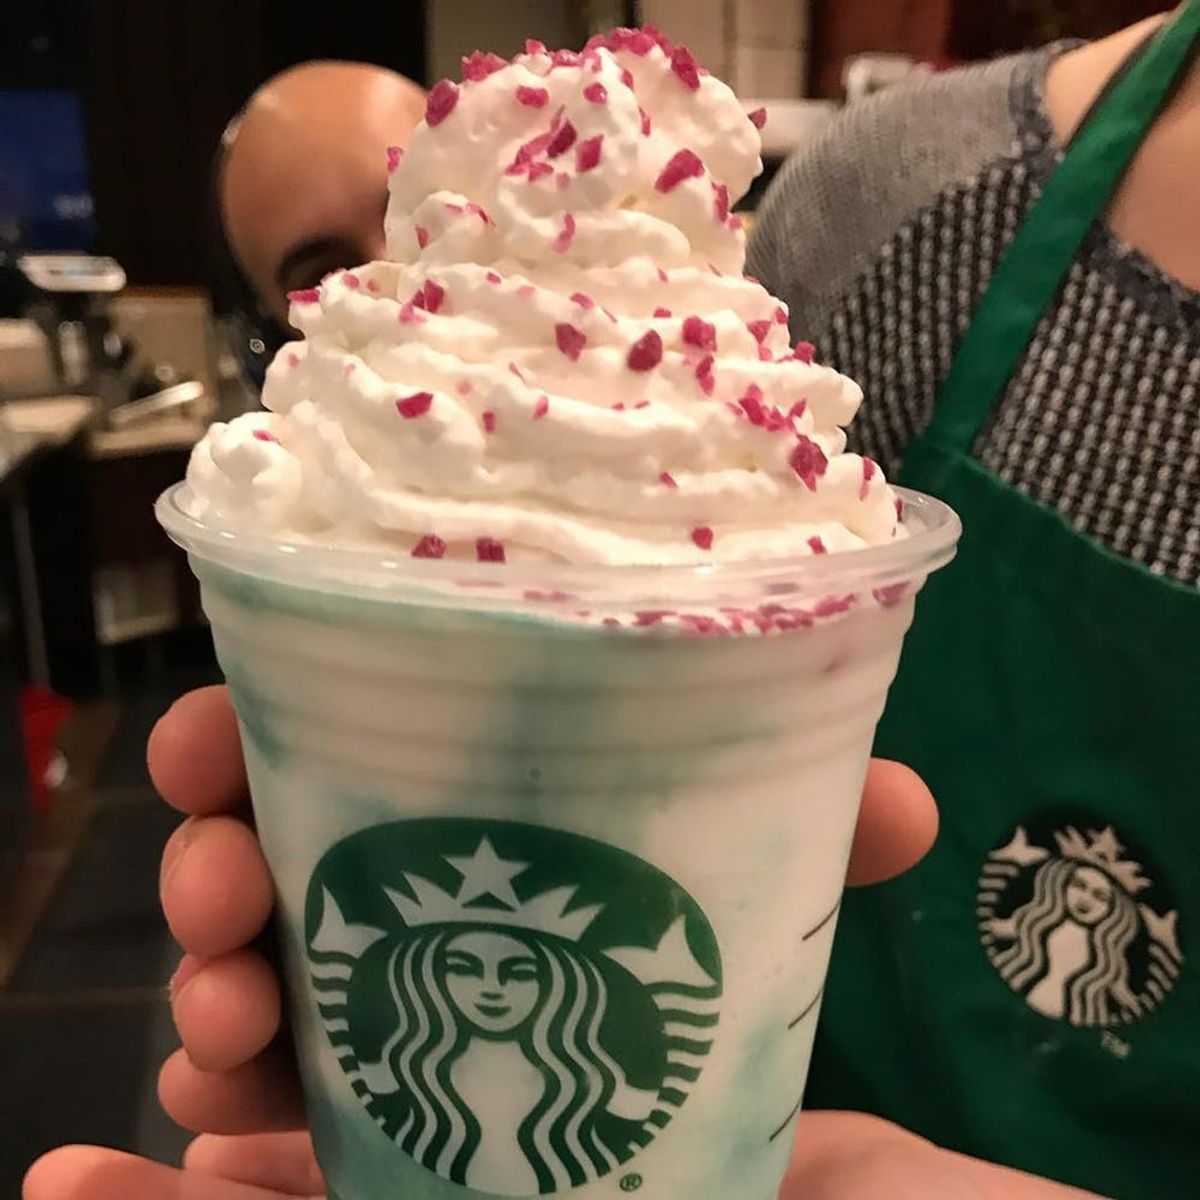 You Don’t Need a “Crystal Ball” to Predict This Will Be the Next Starbucks Frappuccino